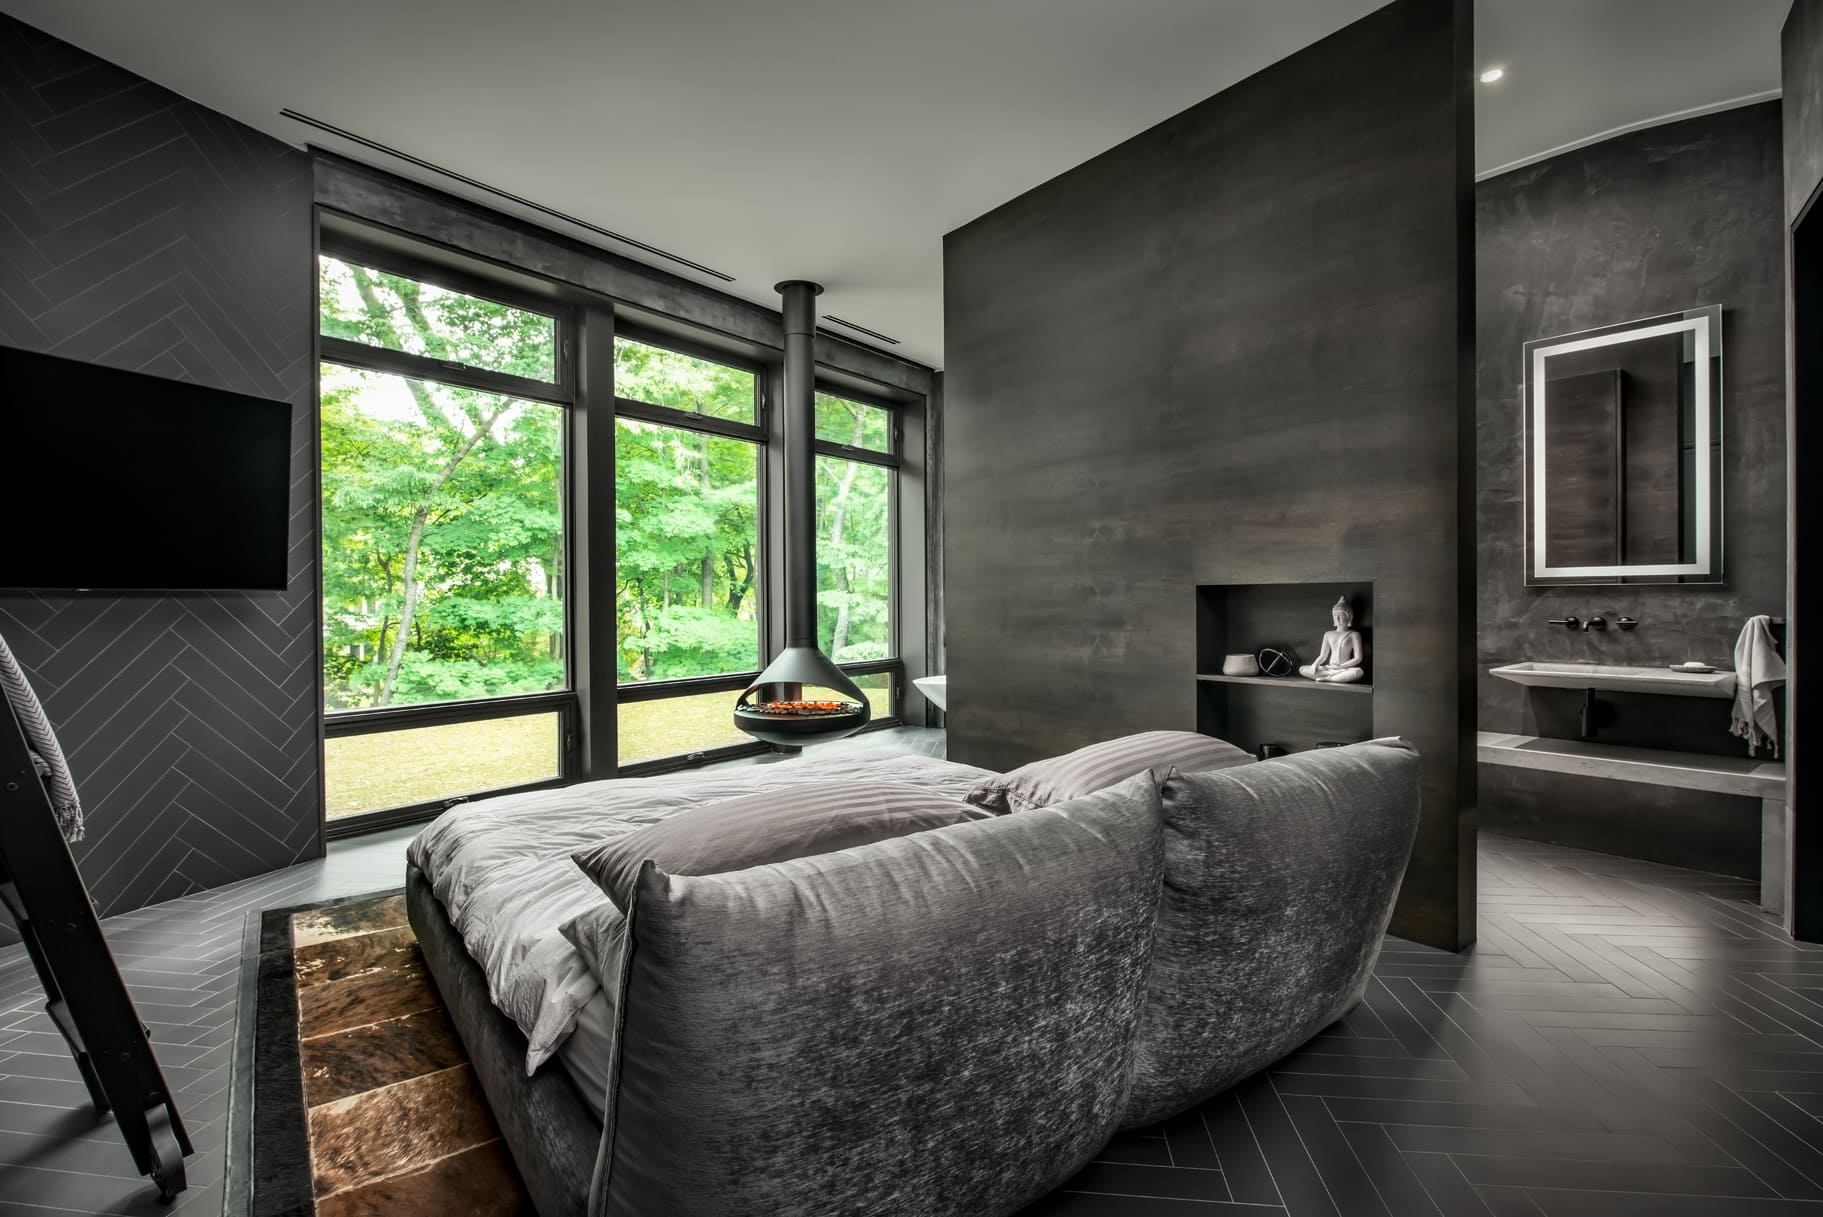 Master bedroom with magnificent ensuite and plenty of floor to ceiling glass windows.